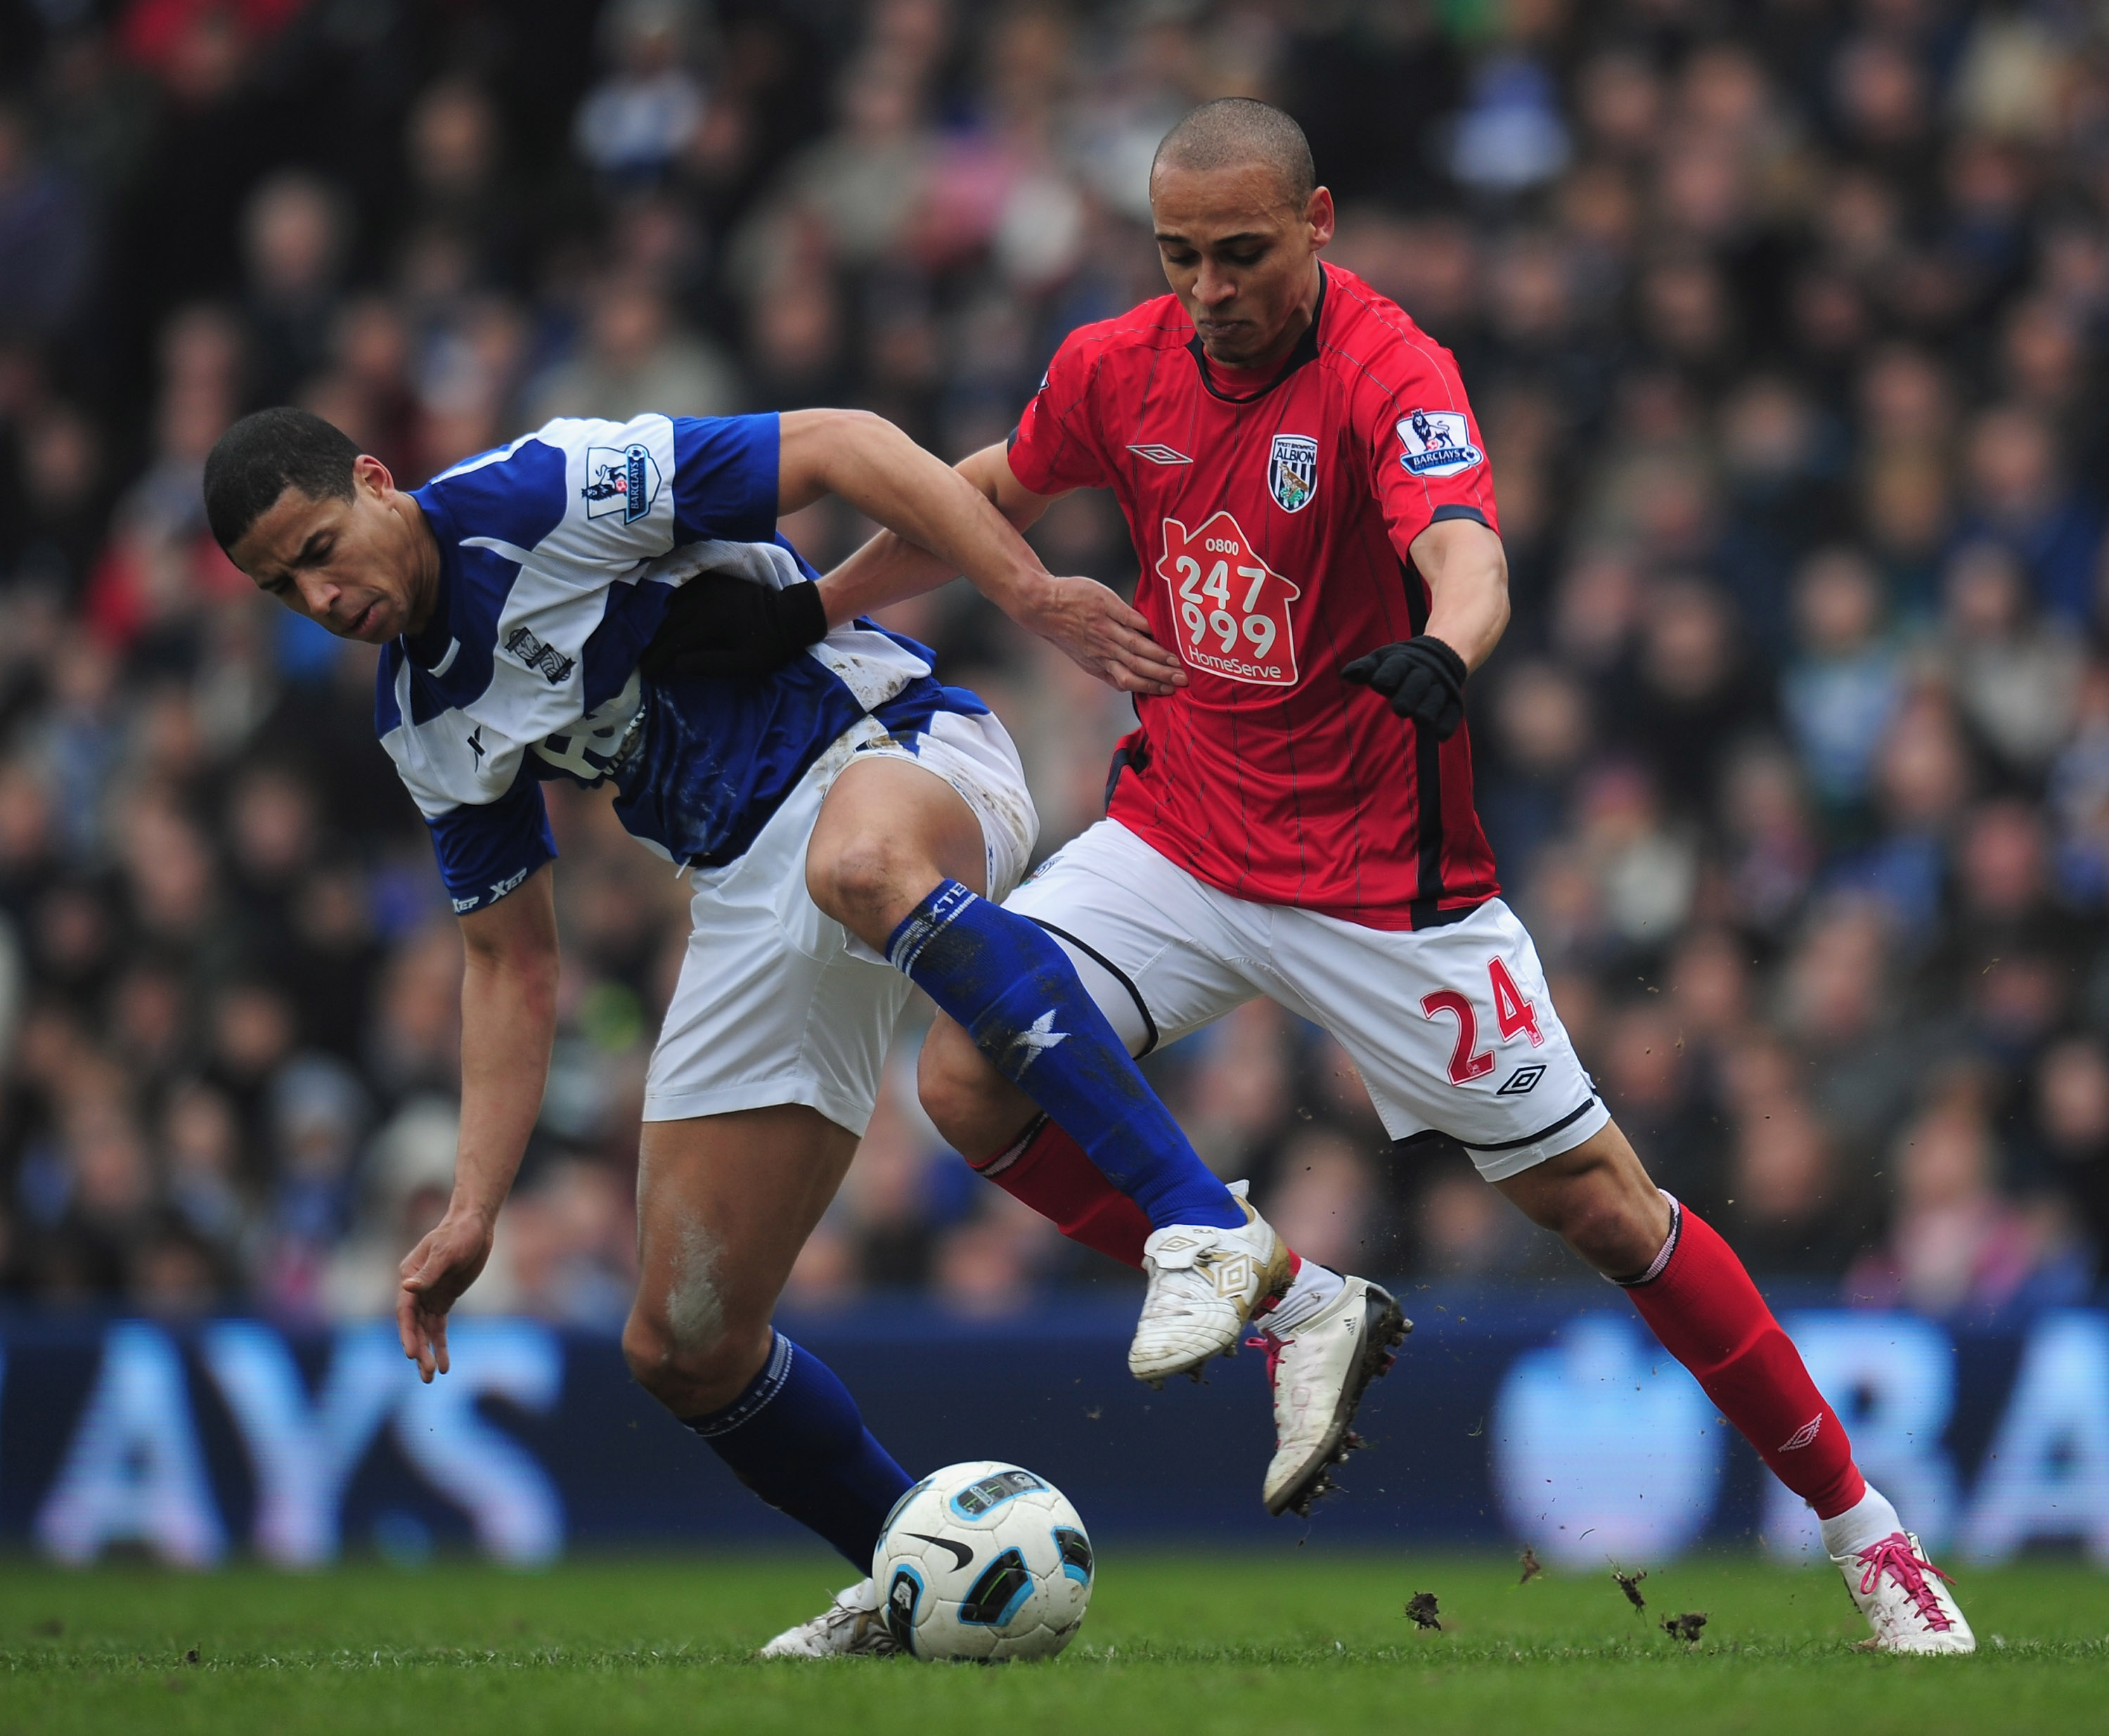 BIRMINGHAM, ENGLAND - MARCH 05:  Peter Odemwingie of West Bromich Albion is challenged by Curtis Davies of Birmingham City during the Barclays Premier League match between Birmingham City and West Bromwich Albion  on March 5, 2011 in Birmingham, England.